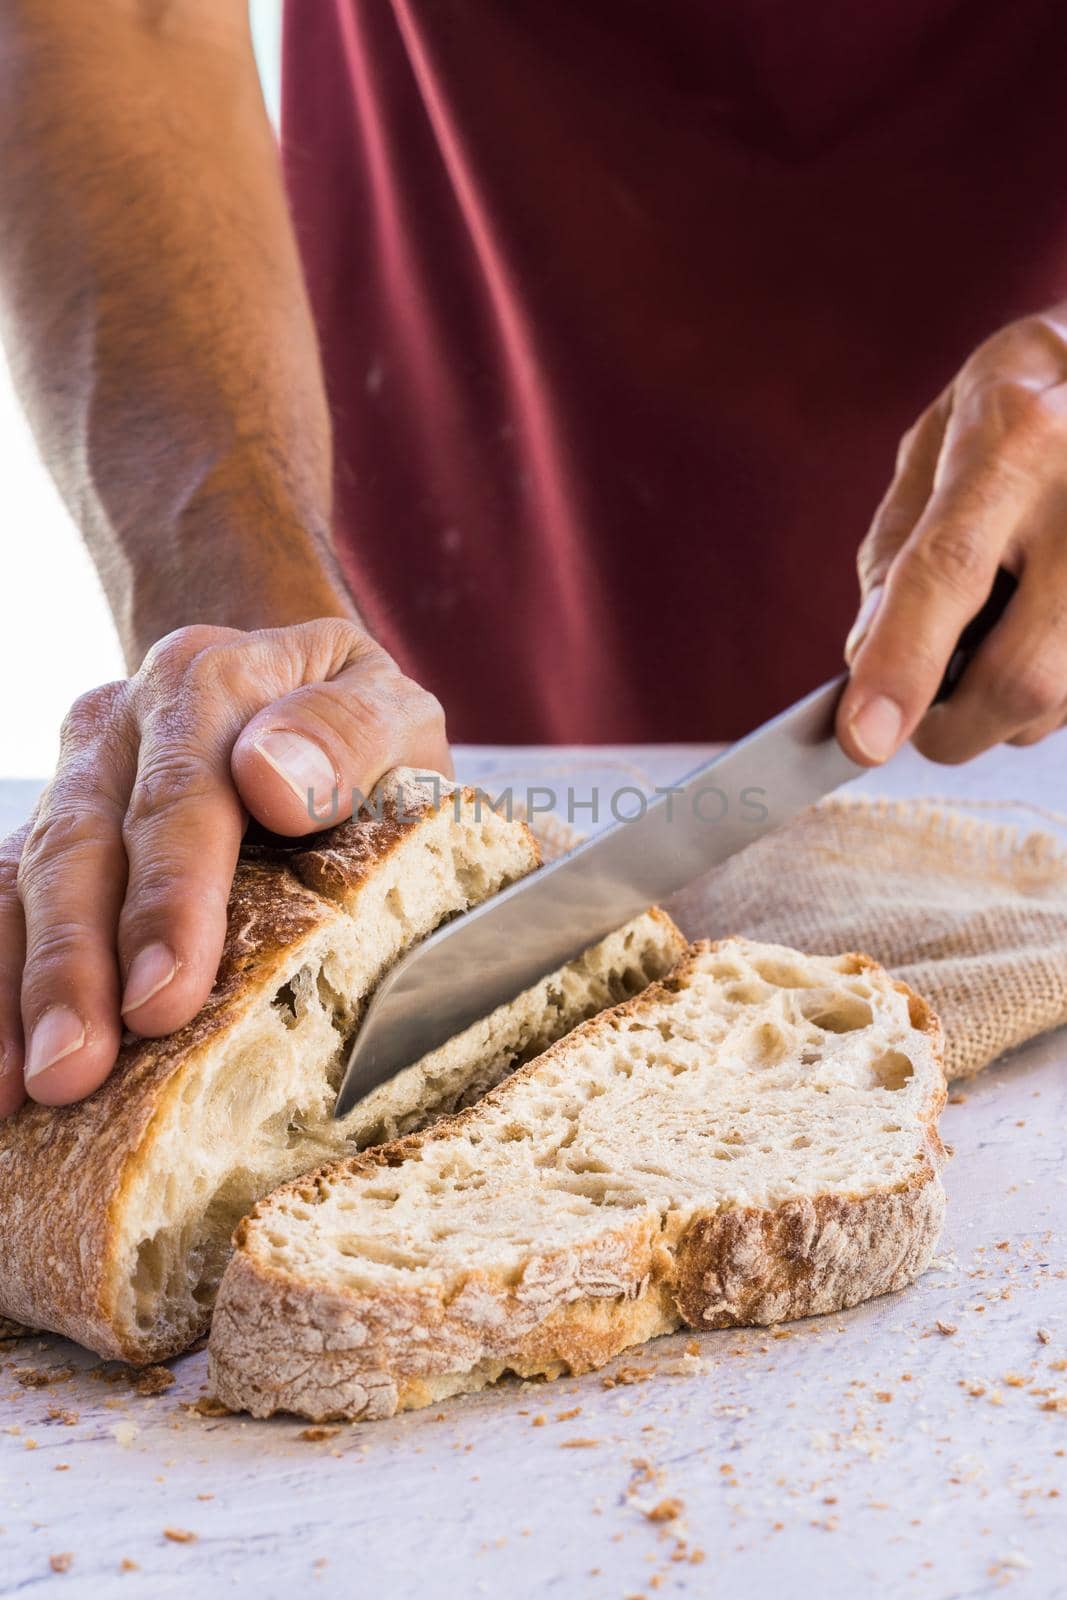 vertical image of man's hands breaking organic bread in the foreground with knife surrounded by crumbs on white table with natural light